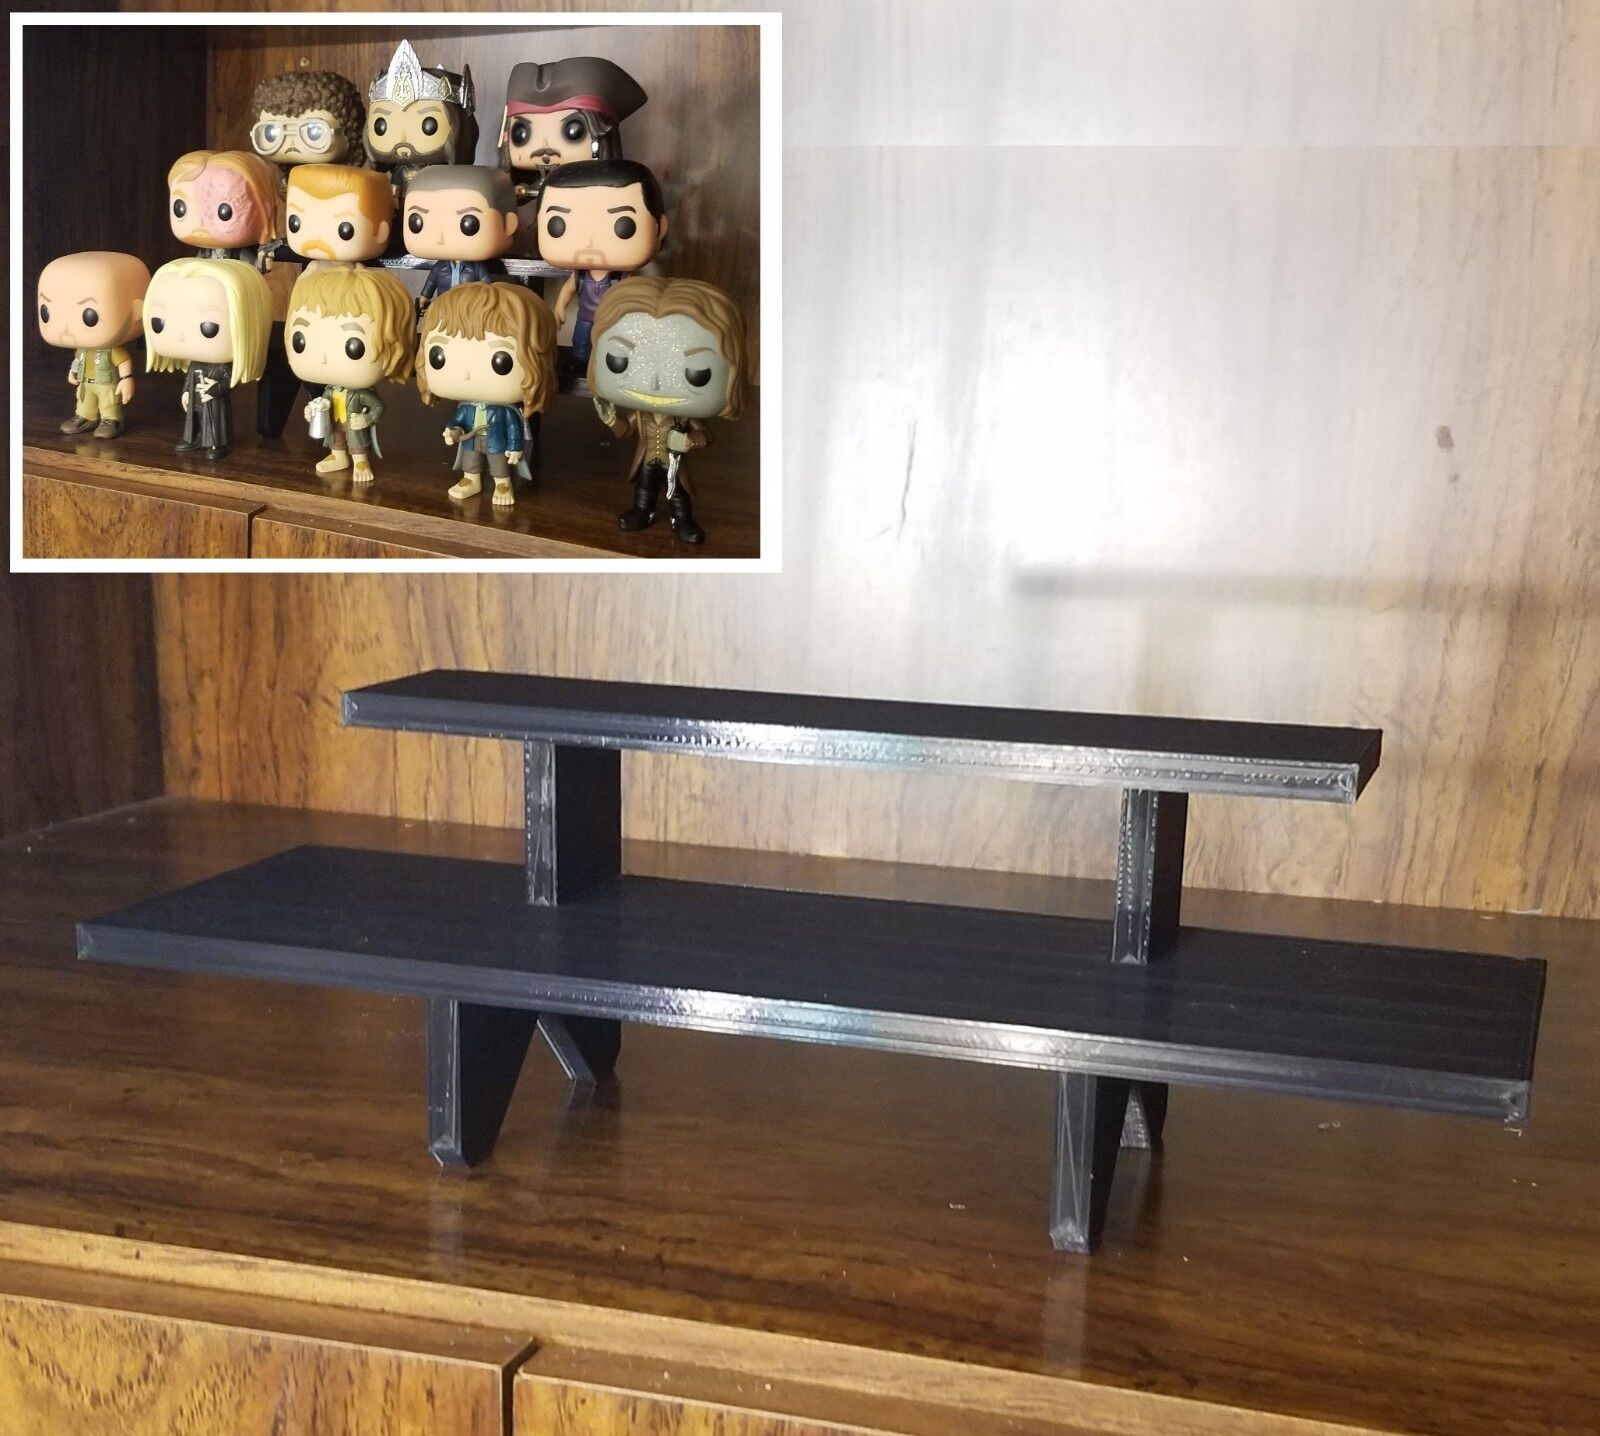 12 inch - 2-Tier Black Riser Display Stand Shelf - For Small  Such as Funko Pops